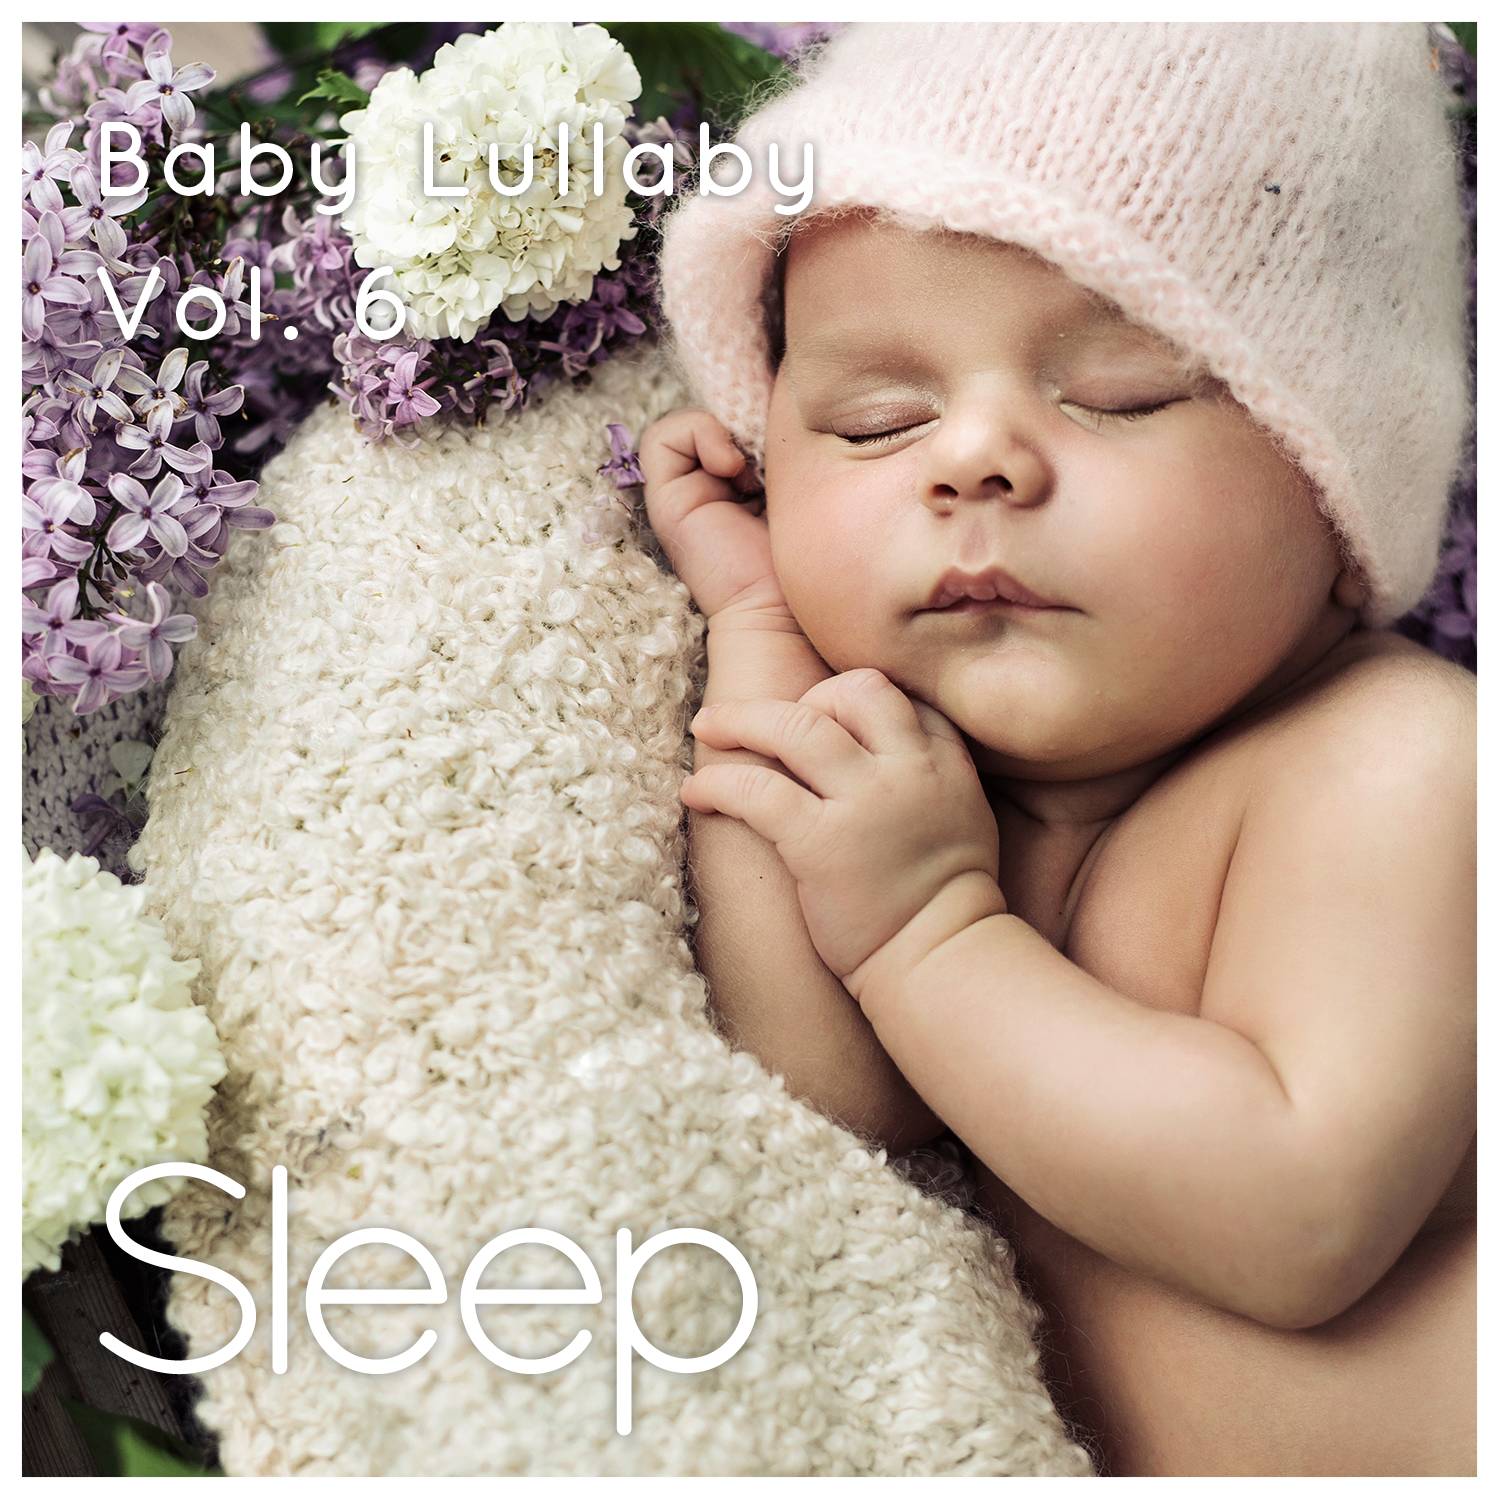 Baby Sleep Ambient Lullaby, Pt. 28